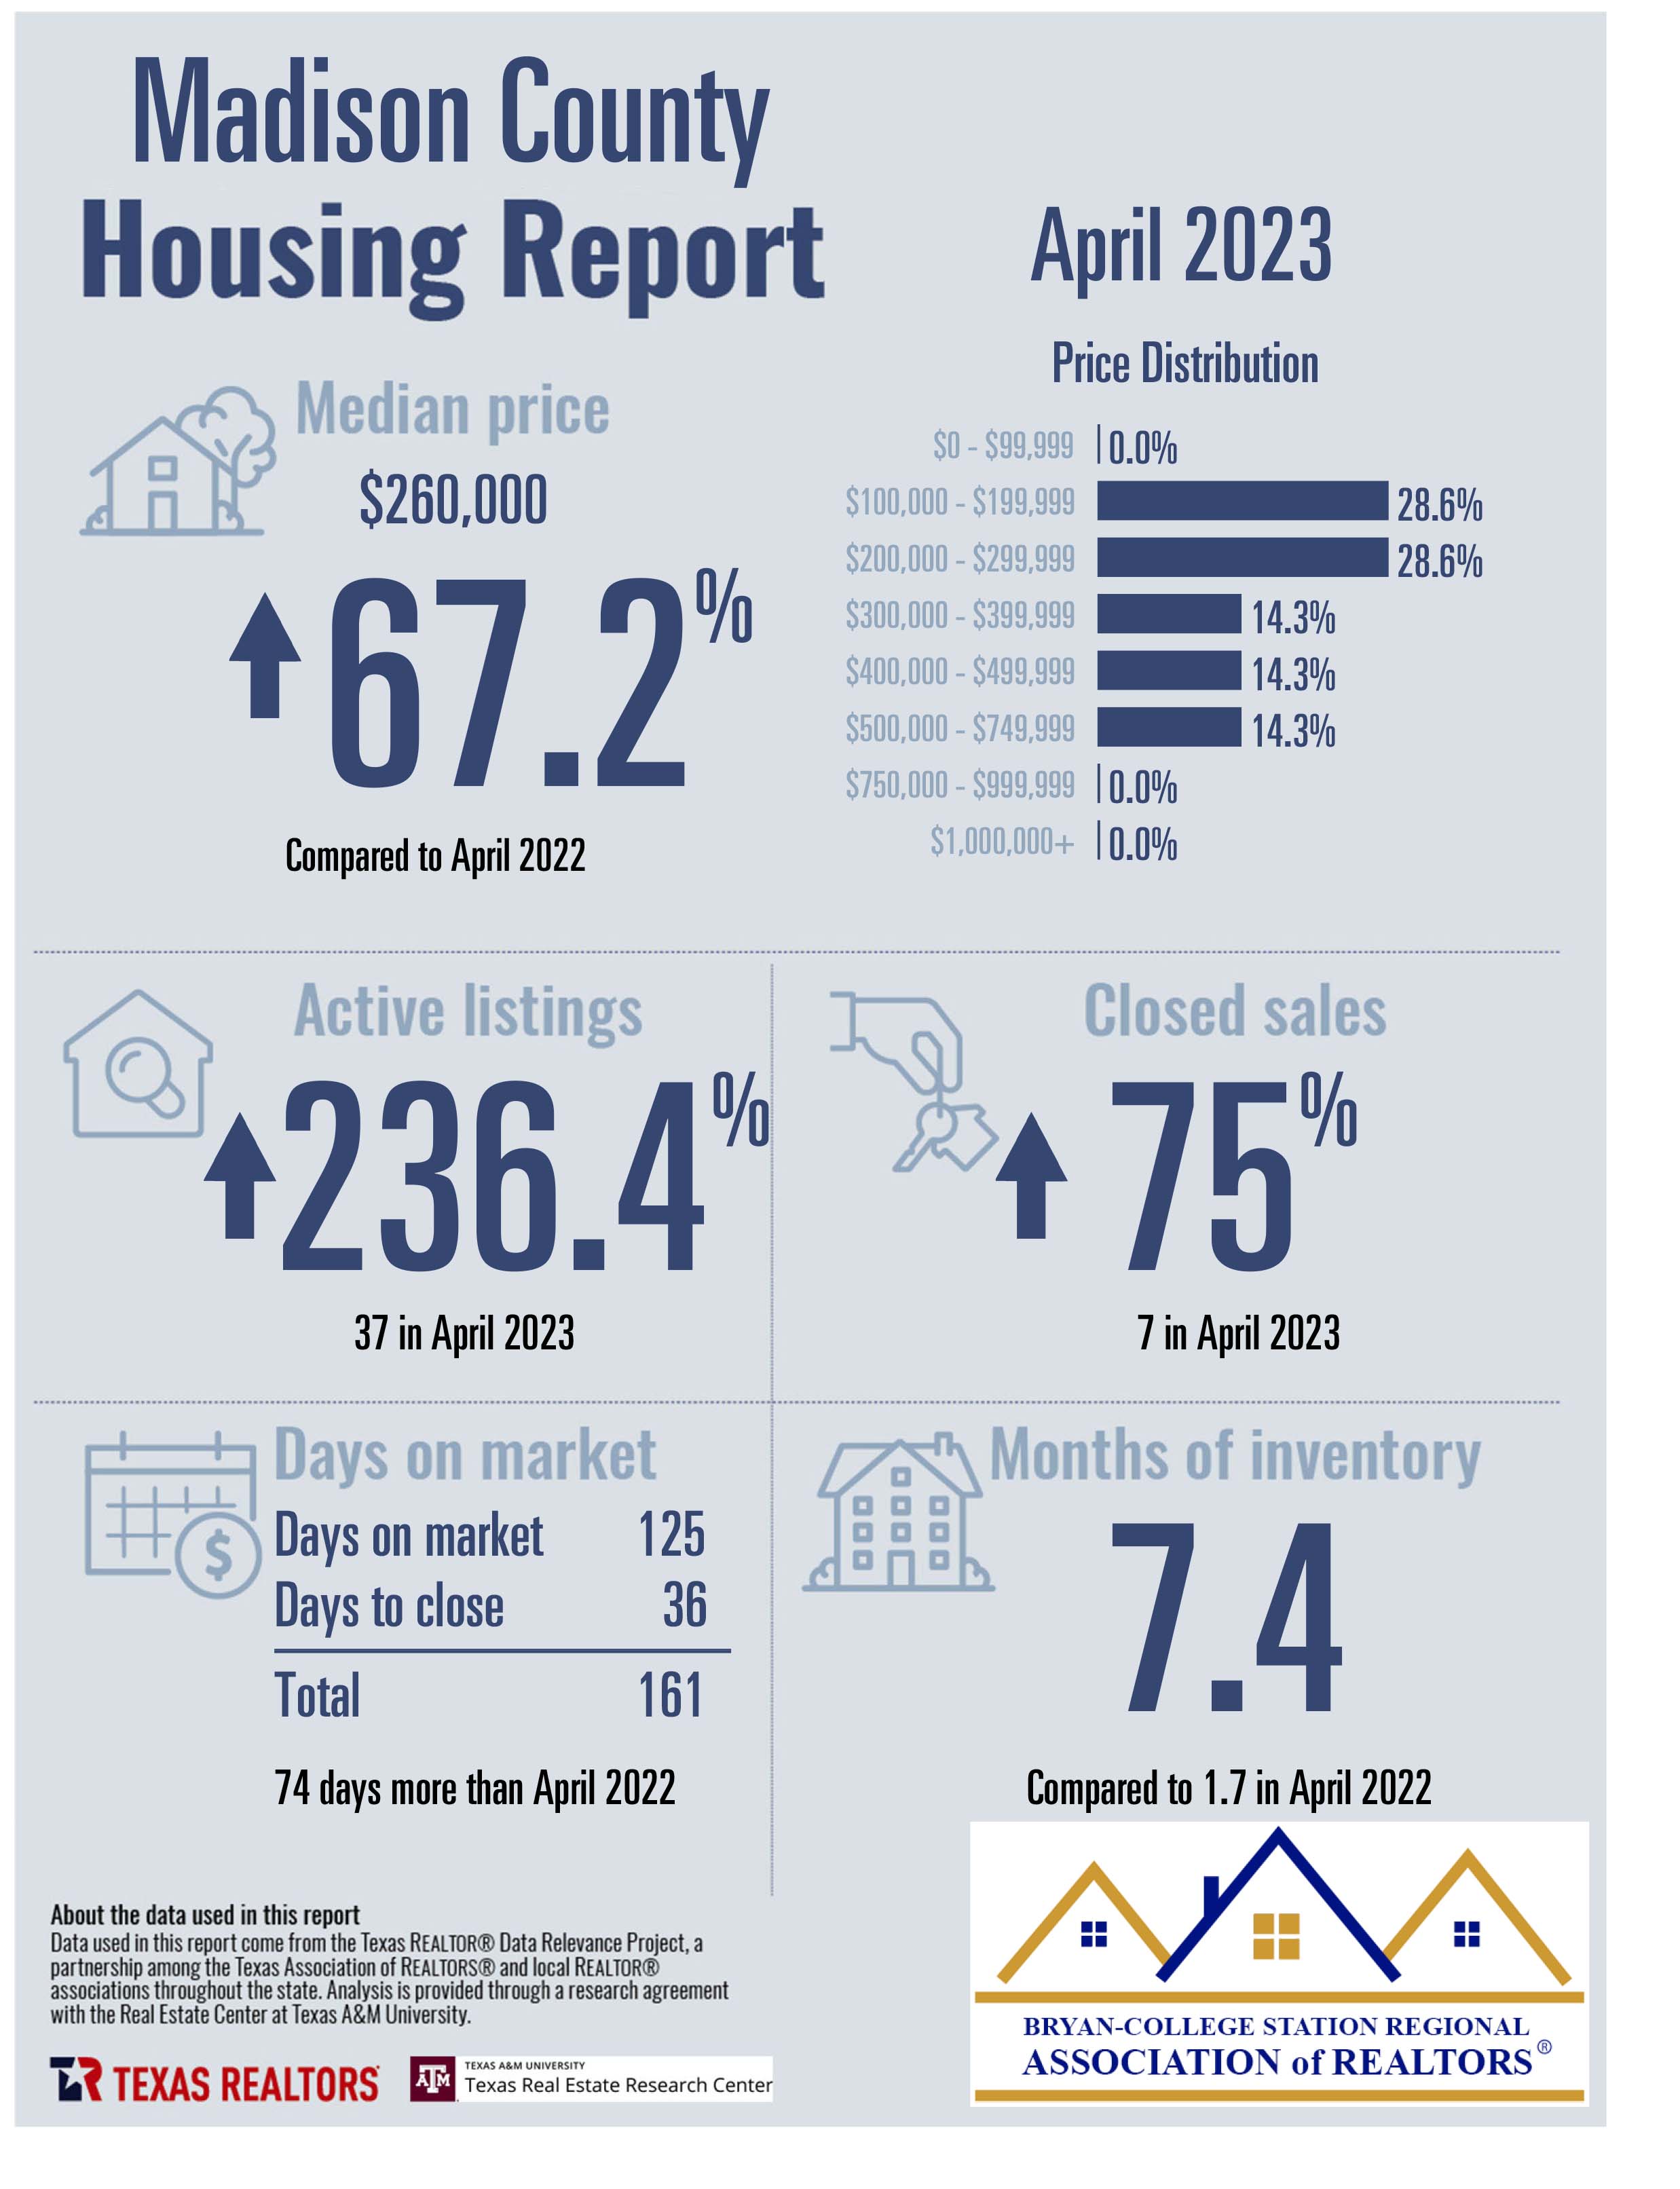 Residential Home Sale Report may 2023 - Madison